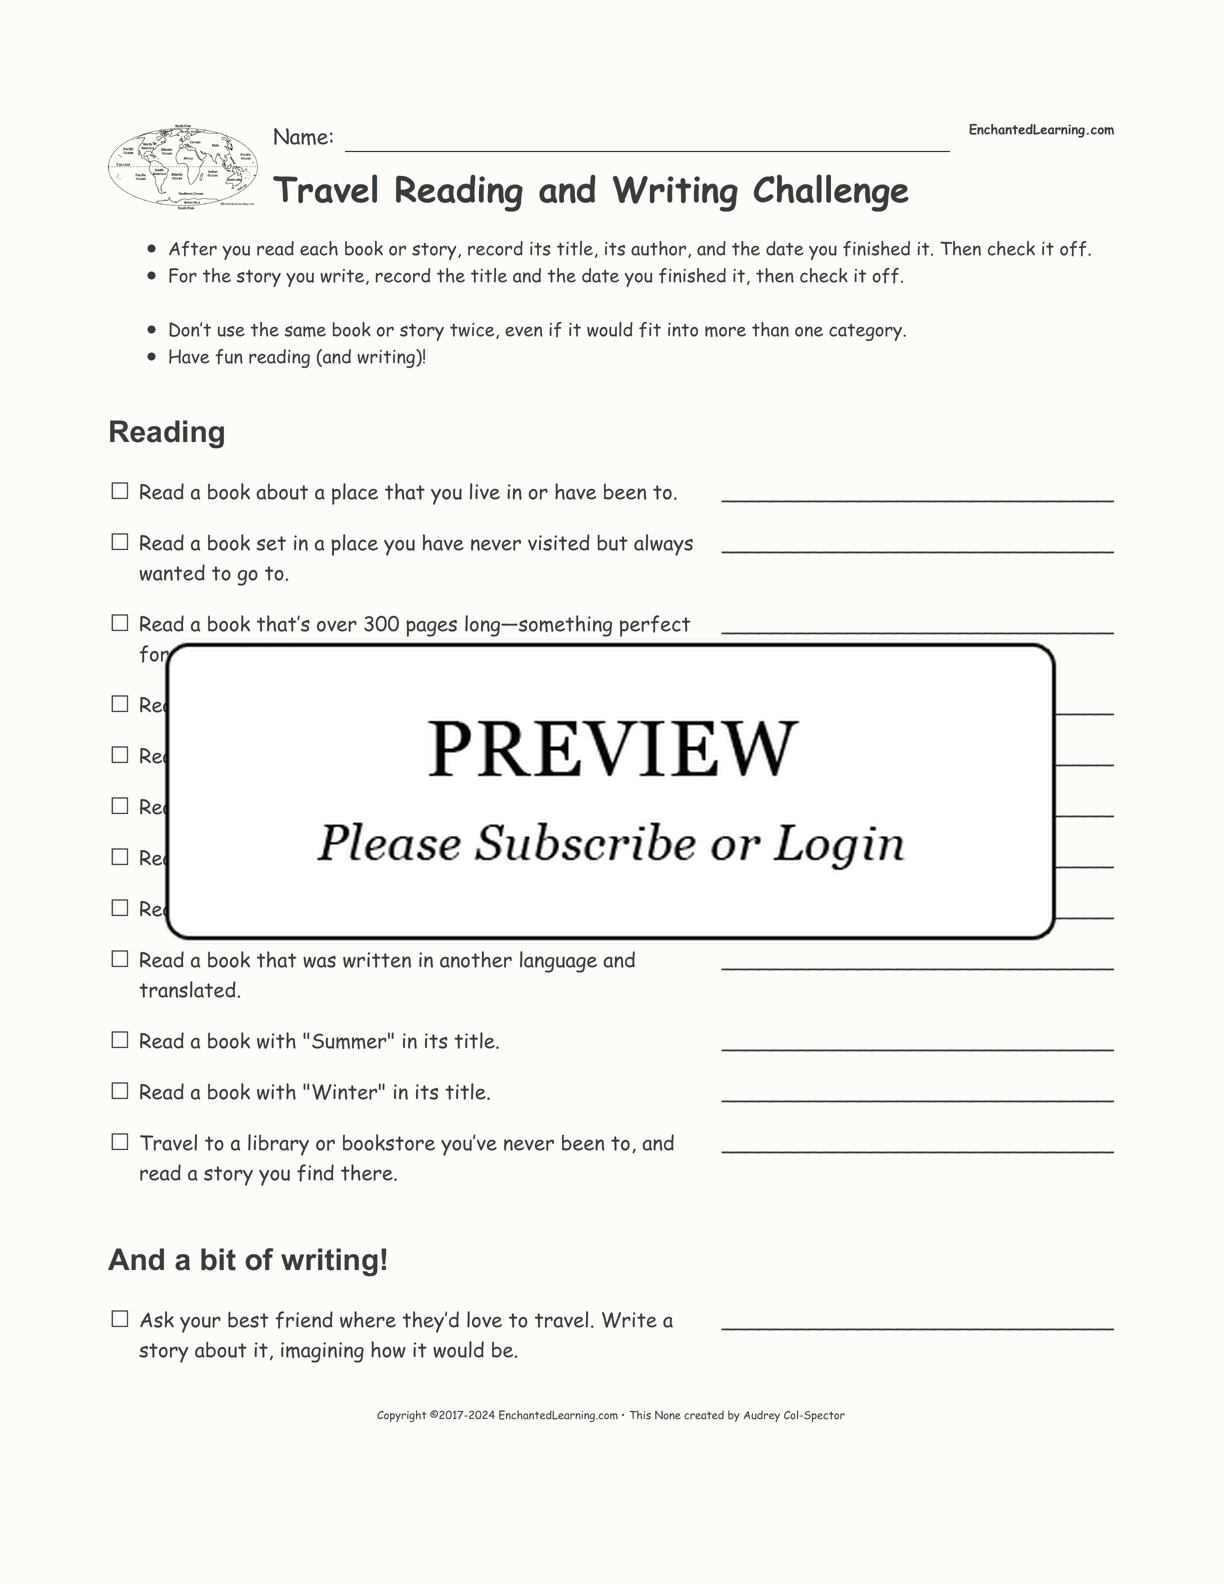 Travel Reading and Writing Challenge interactive printout page 1